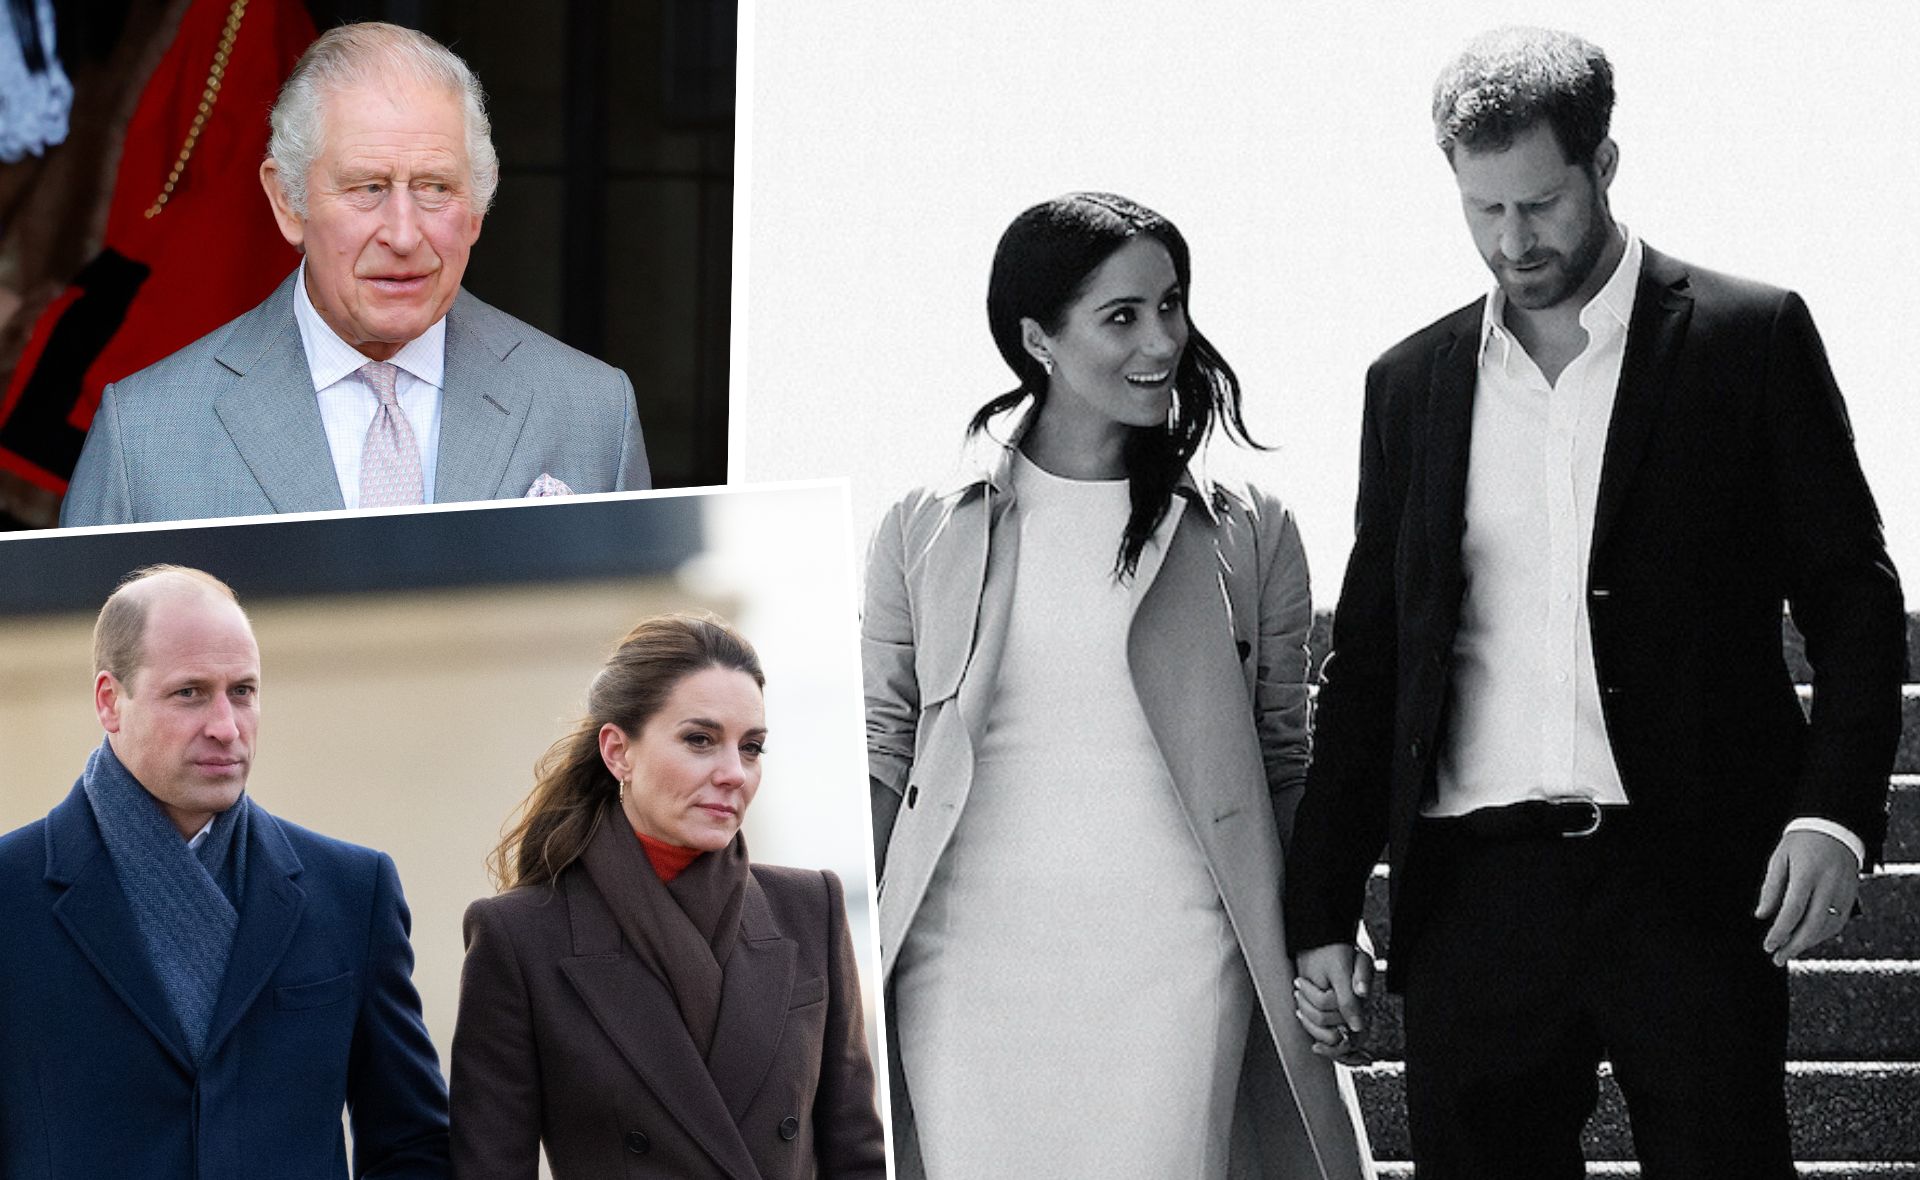 The Royal Family responds to the Harry & Meghan Netflix doco